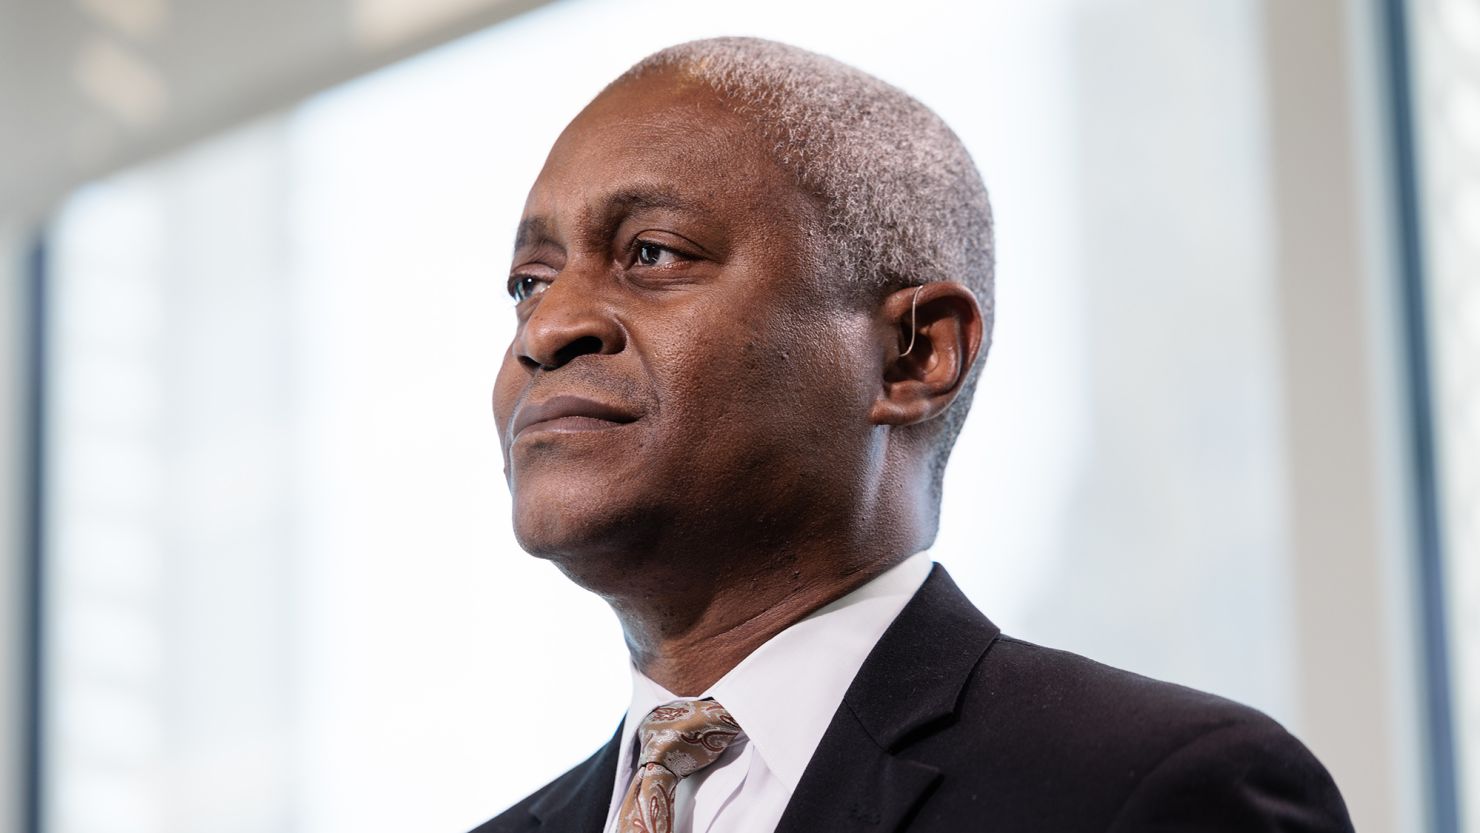 Raphael Bostic, president of the Atlanta Federal Reserve, is pleased with how the economy is performing, but he warned it could take a while before inflation returns to the central bank's 2% target.